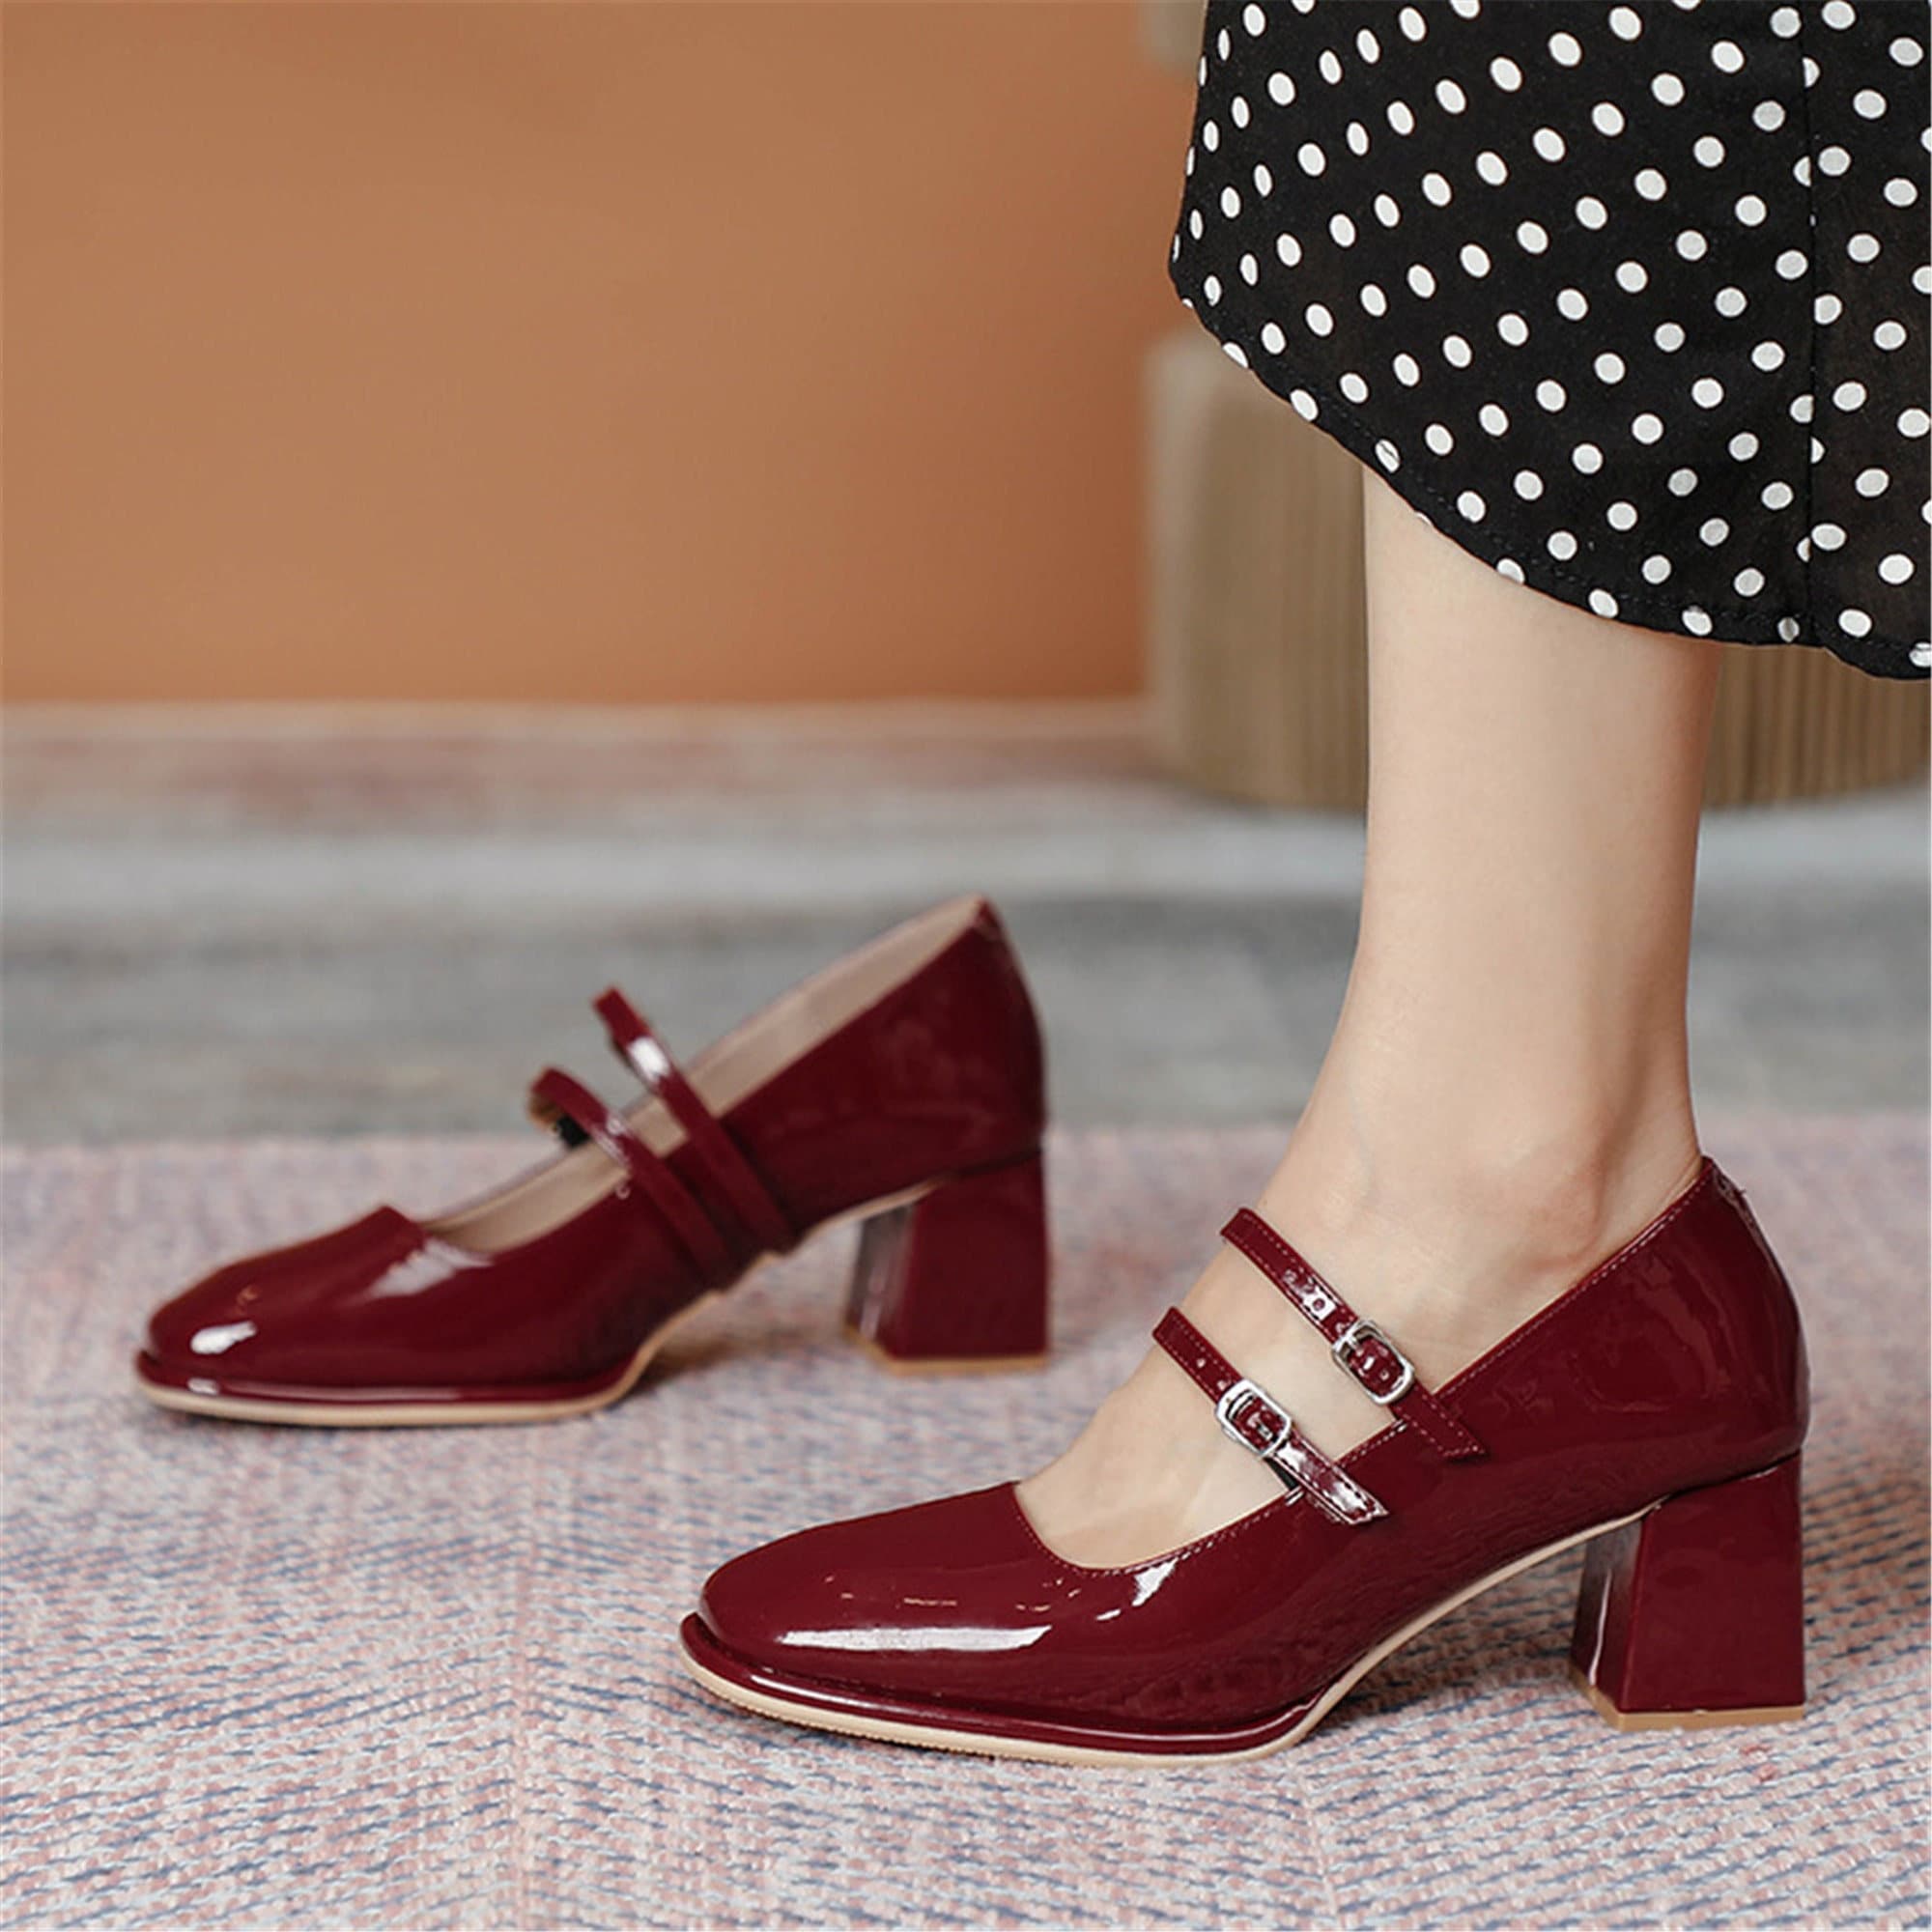 Ankle Strap Barefoot Flats Cuero perforado Mary Jane Shoes Red Patent For Women Handmade Custom Shoes Wide Width Zapatos Zapatos para mujer Merceditas 